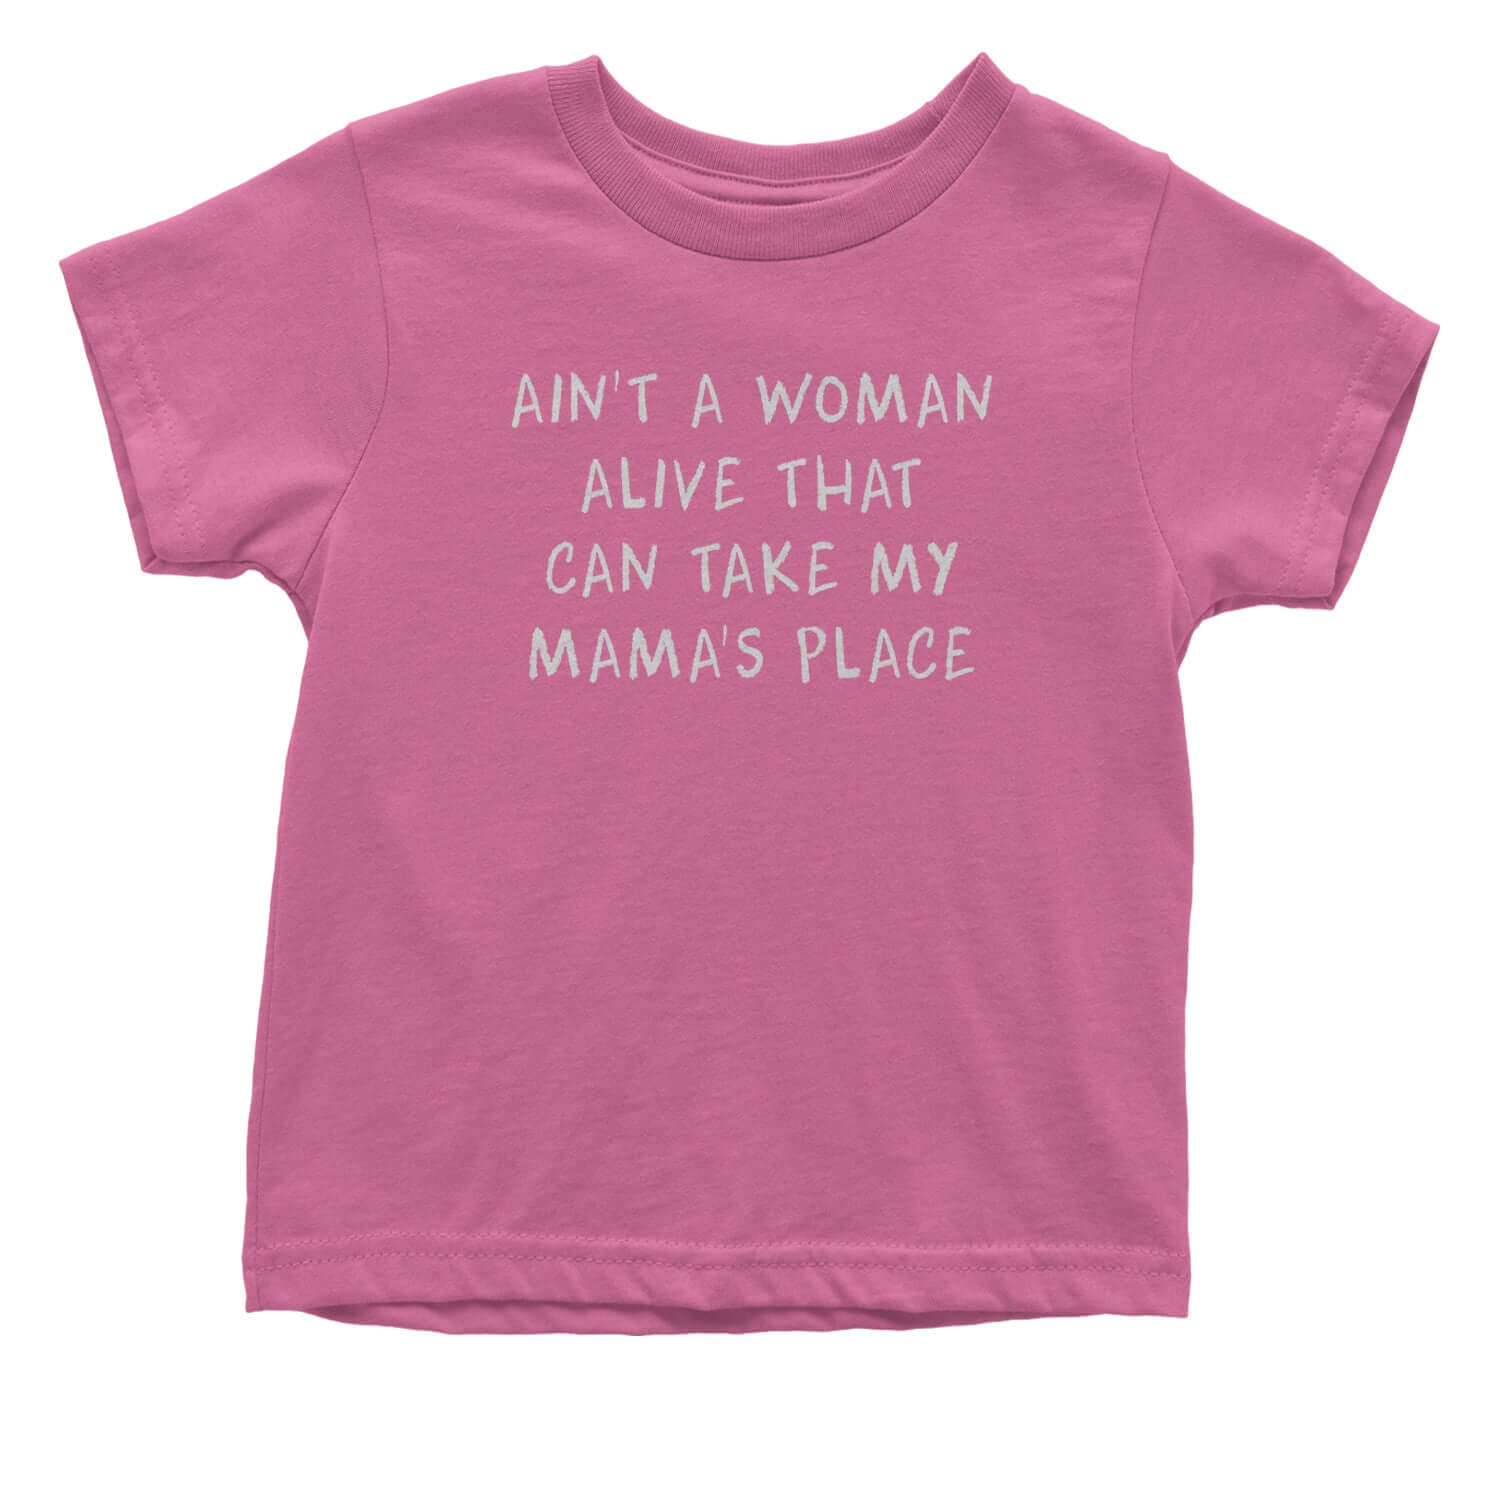 Ain't A Woman Alive That Can Take My Mama's Place Infant One-Piece Romper Bodysuit and Toddler T-shirt 2pac, bear, day, mama, mom, mothers, shakur, tupac by Expression Tees